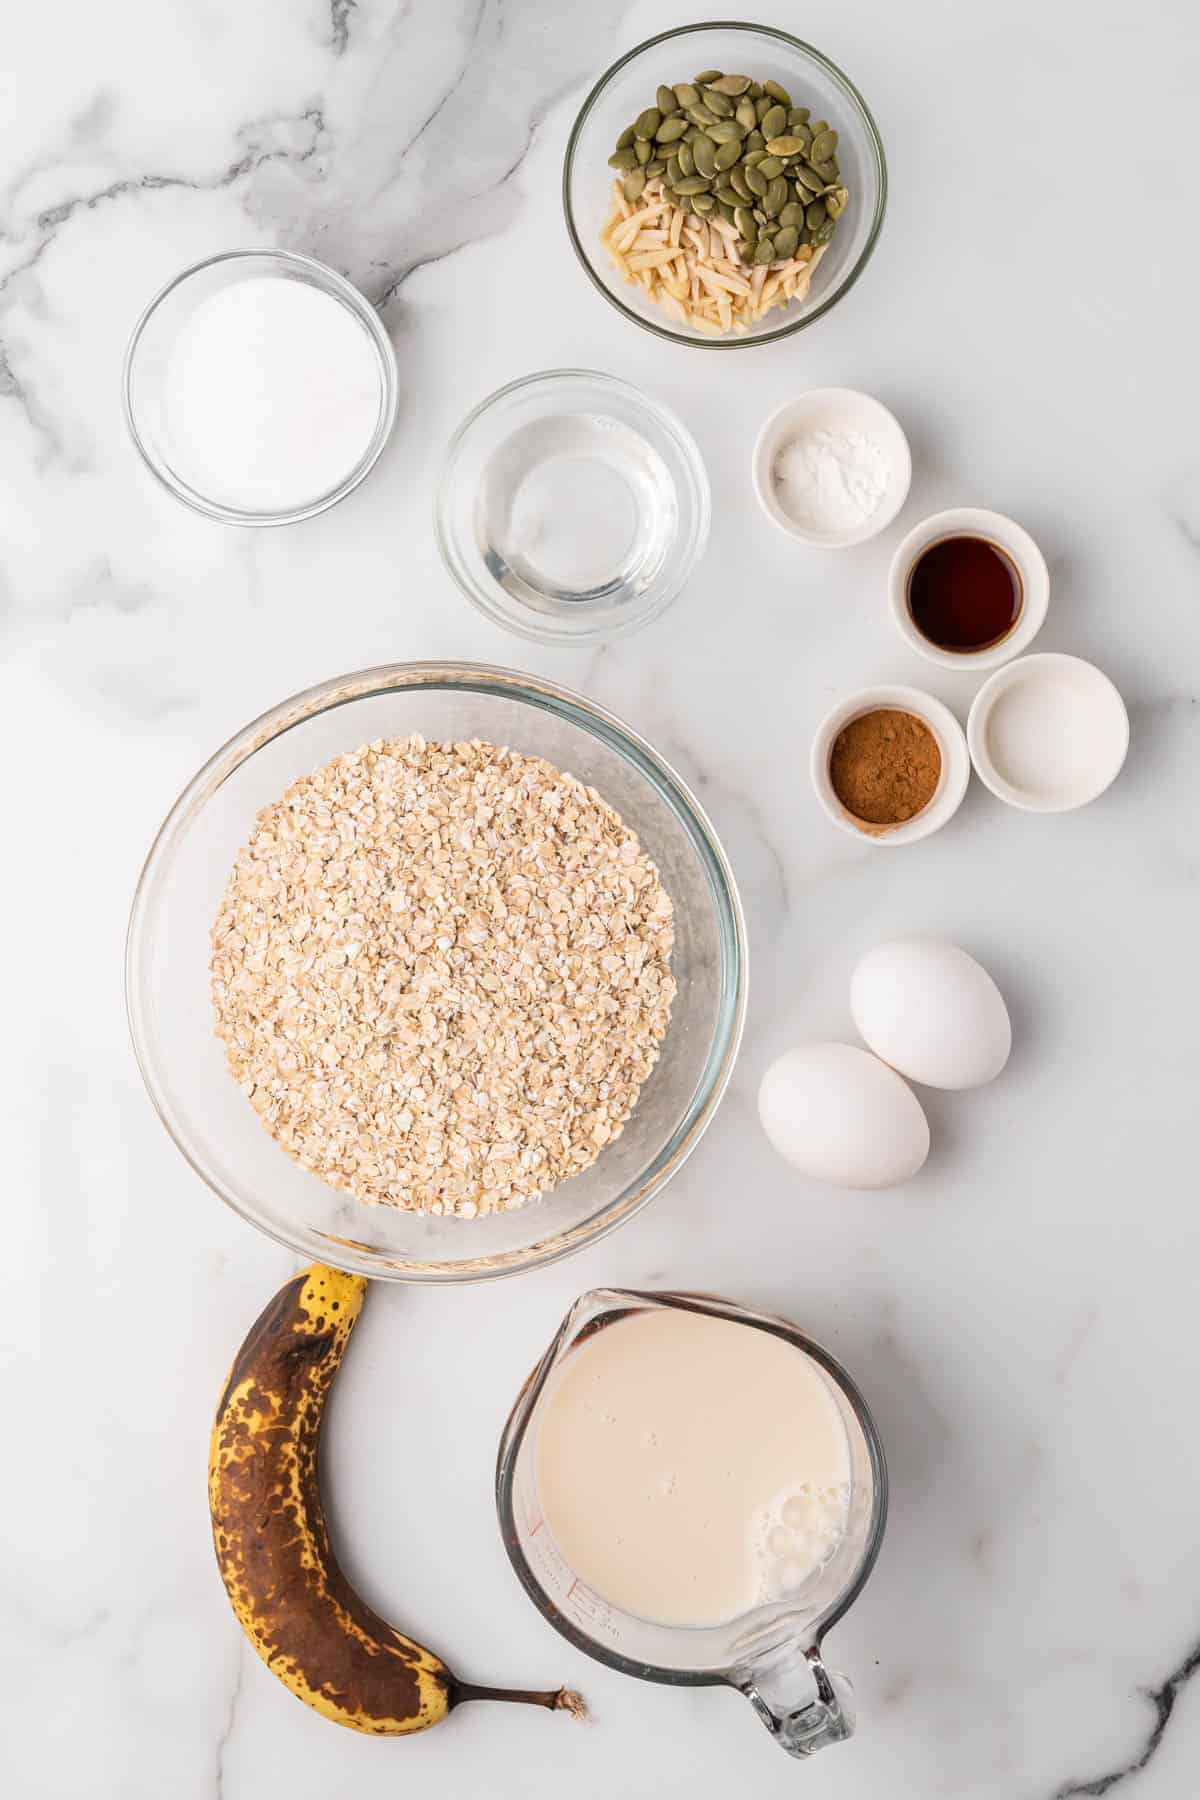 Ingredients in separate bowls and ramekins on a white backdrop, as seen from above